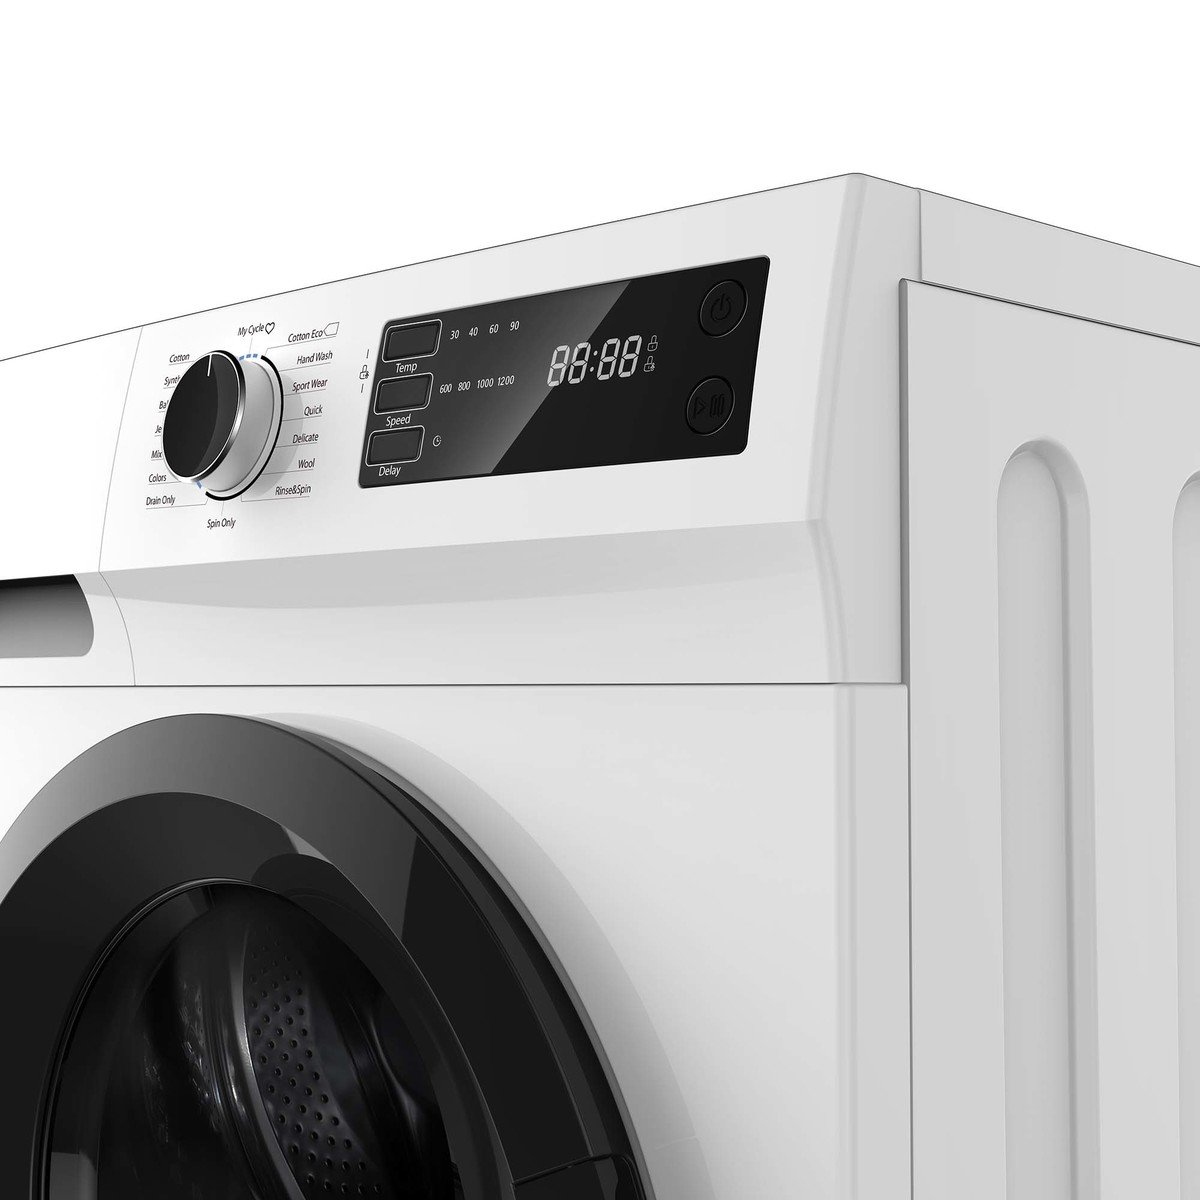 Toshiba Front Load Washing Machine TW-H90S2A 8KG,1200 RPM